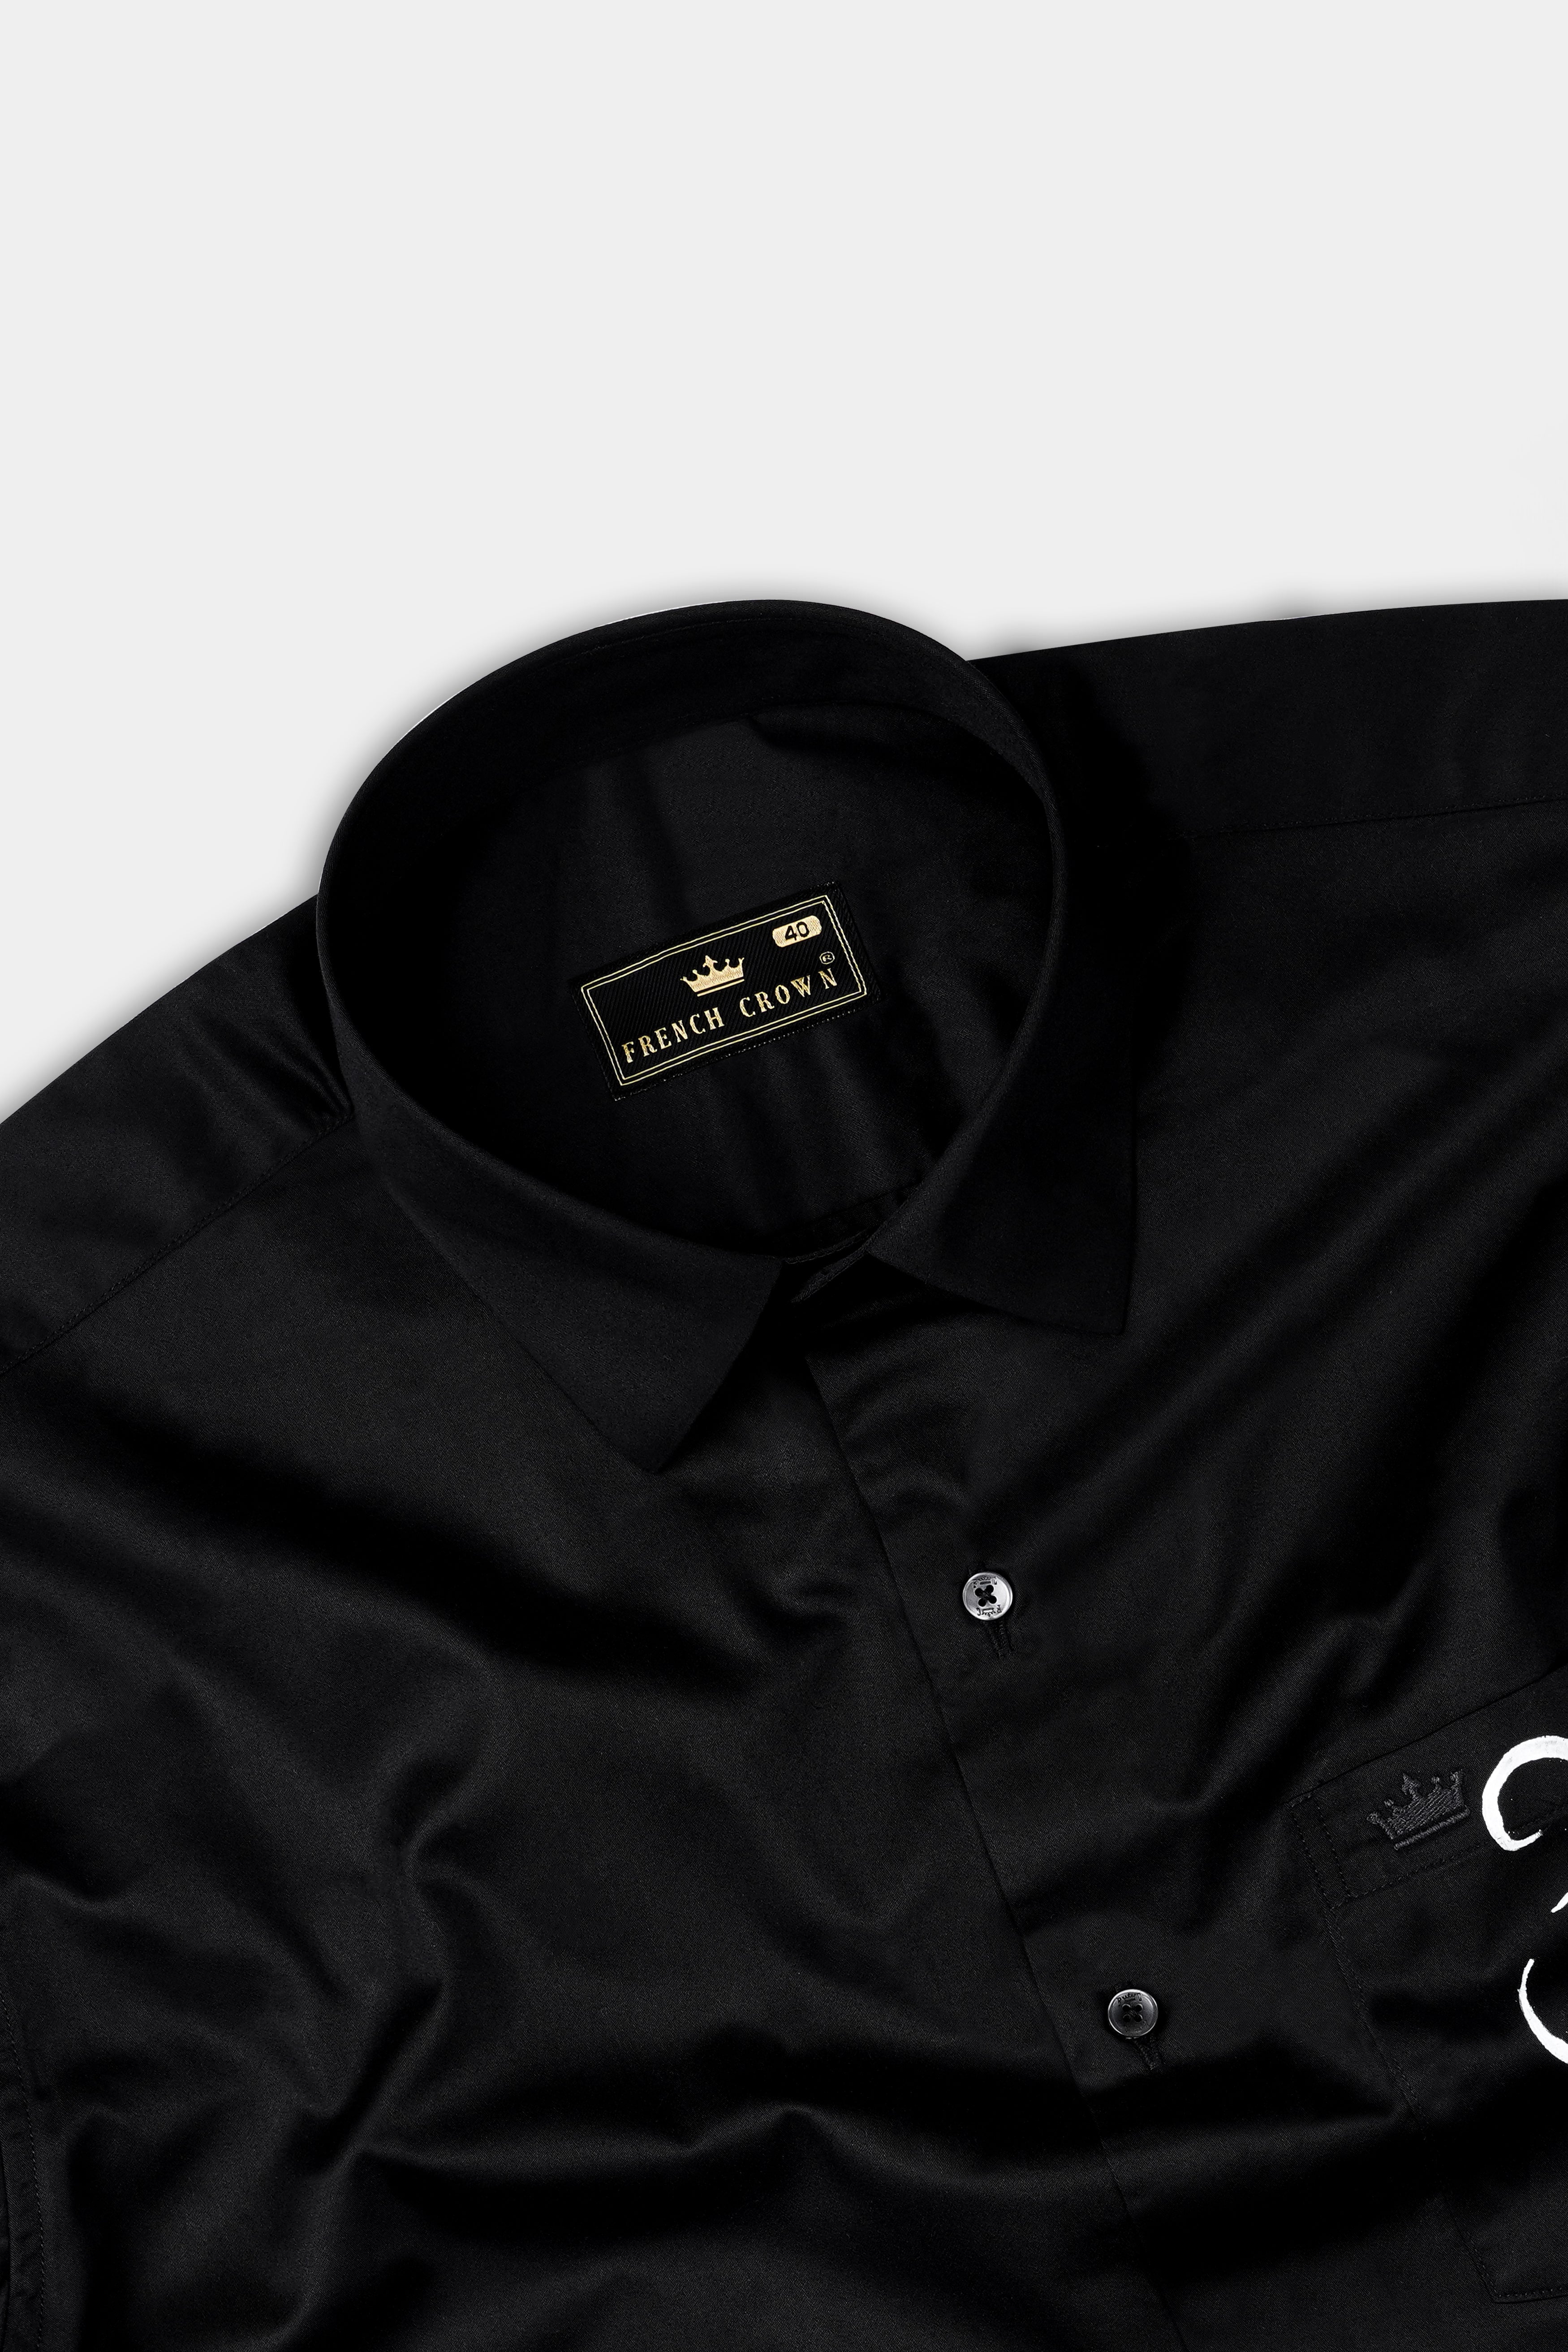 Jade Black with OM and Lord Ganesh Hand Painted Subtle Sheen Super Soft Premium Cotton Designer Shirt 1312-BLK-ART05-38, 1312-BLK-ART05-H-38, 1312-BLK-ART05-39, 1312-BLK-ART05-H-39, 1312-BLK-ART05-40, 1312-BLK-ART05-H-40, 1312-BLK-ART05-42, 1312-BLK-ART05-H-42, 1312-BLK-ART05-44, 1312-BLK-ART05-H-44, 1312-BLK-ART05-46, 1312-BLK-ART05-H-46, 1312-BLK-ART05-48, 1312-BLK-ART05-H-48, 1312-BLK-ART05-50, 1312-BLK-ART05-H-50, 1312-BLK-ART05-52, 1312-BLK-ART05-H-52